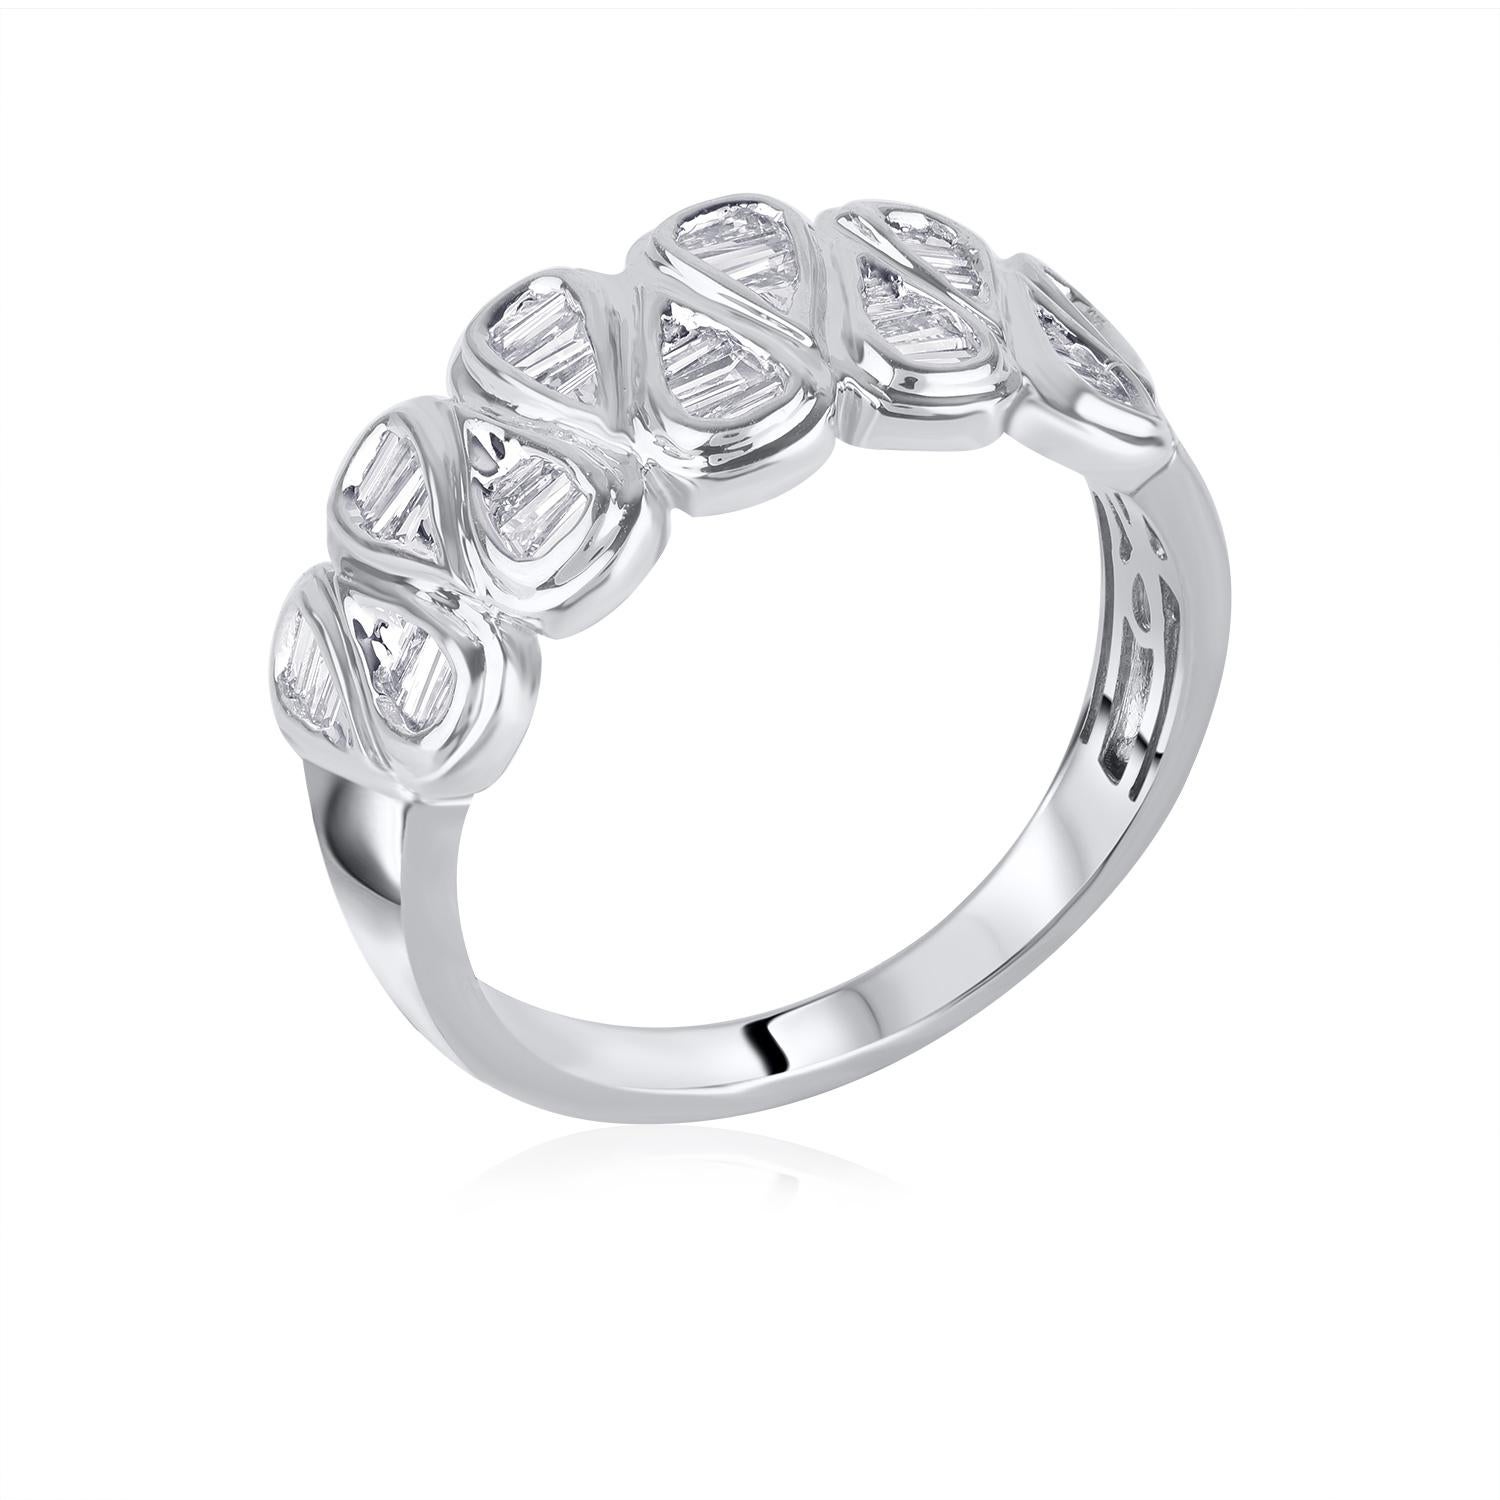 Honor your special day with this exceptional diamond band ring. This band ring features a sparkling 33 brilliant cut diamonds beautifully set in channel setting. The total diamond weight is 0.75 Carat. The diamonds are graded as H-I color and I2